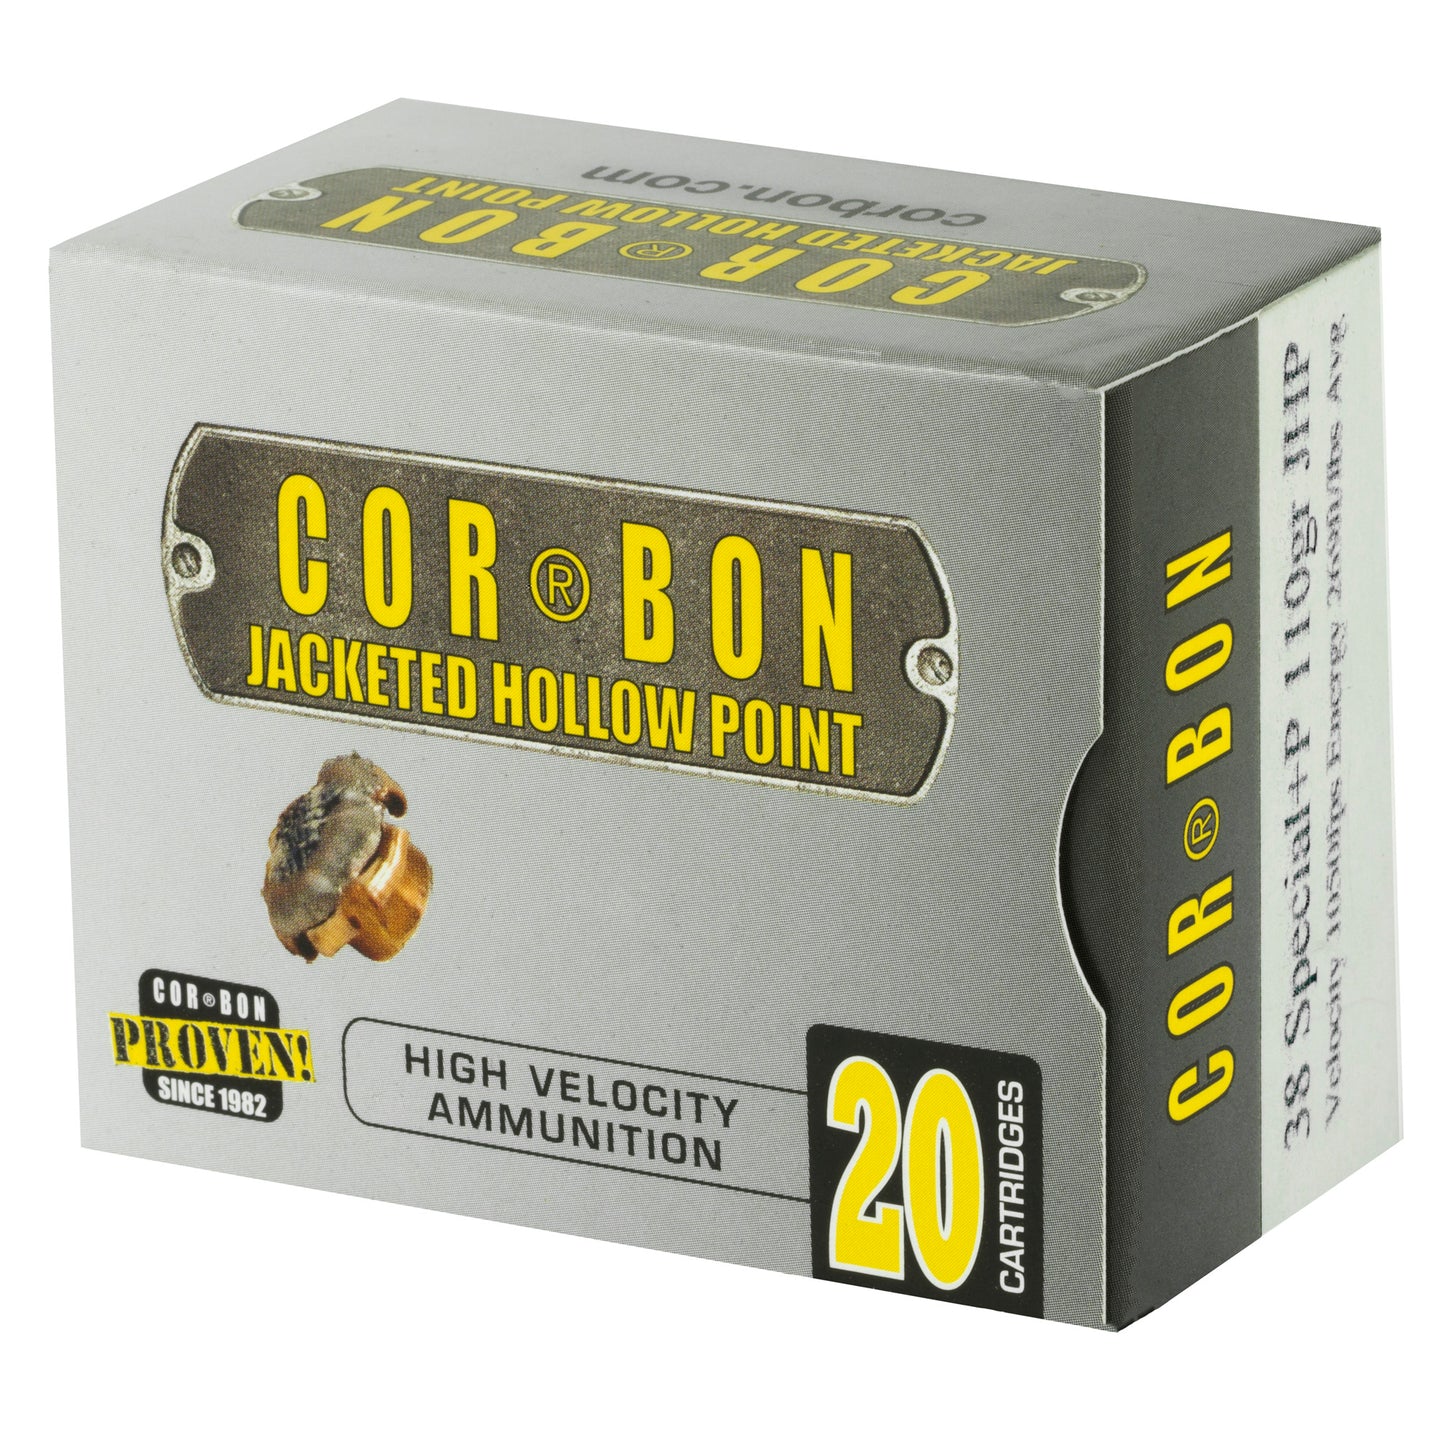 CorBon, Self Defense, .38 Special, 110 Grain, Jacketed Hollow Point, +P, 20 Round Box